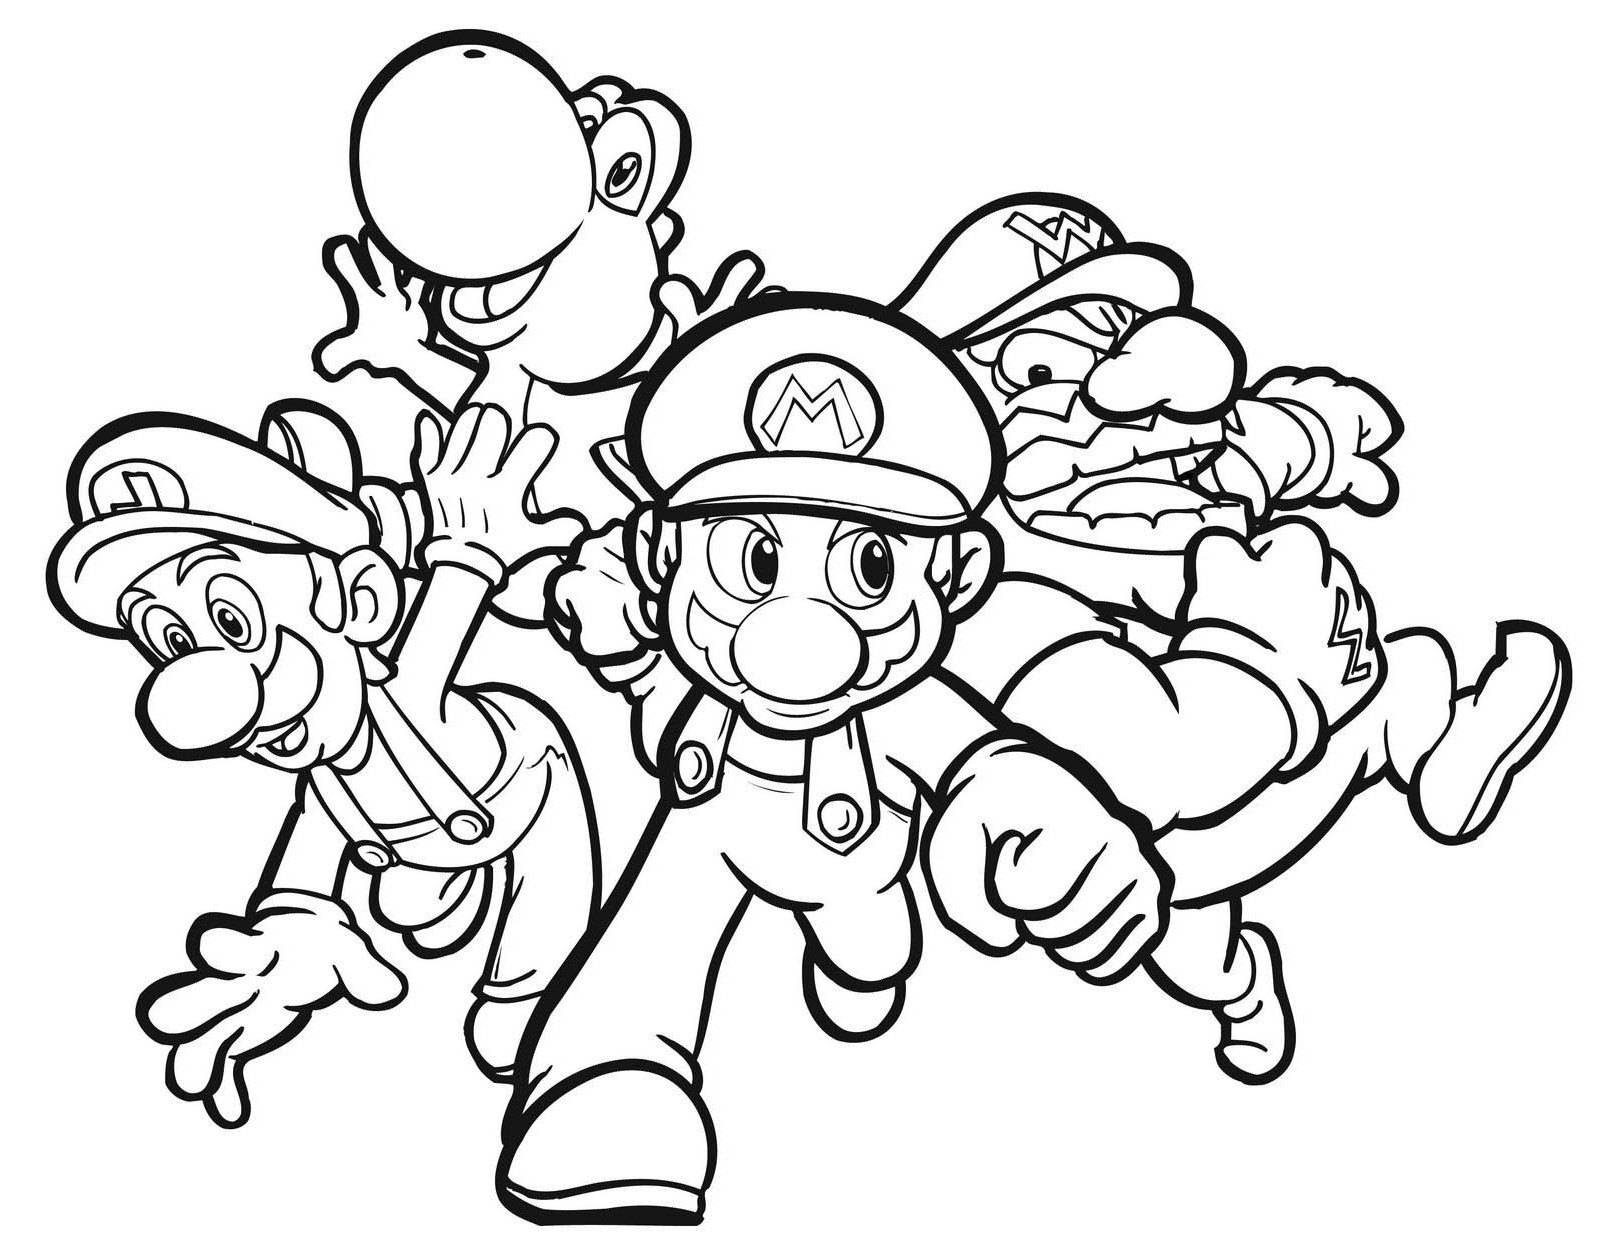 Coloring Pages : Free Printable Mario Coloring Pages At Getcolorings - Mario Coloring Pages Free Printable